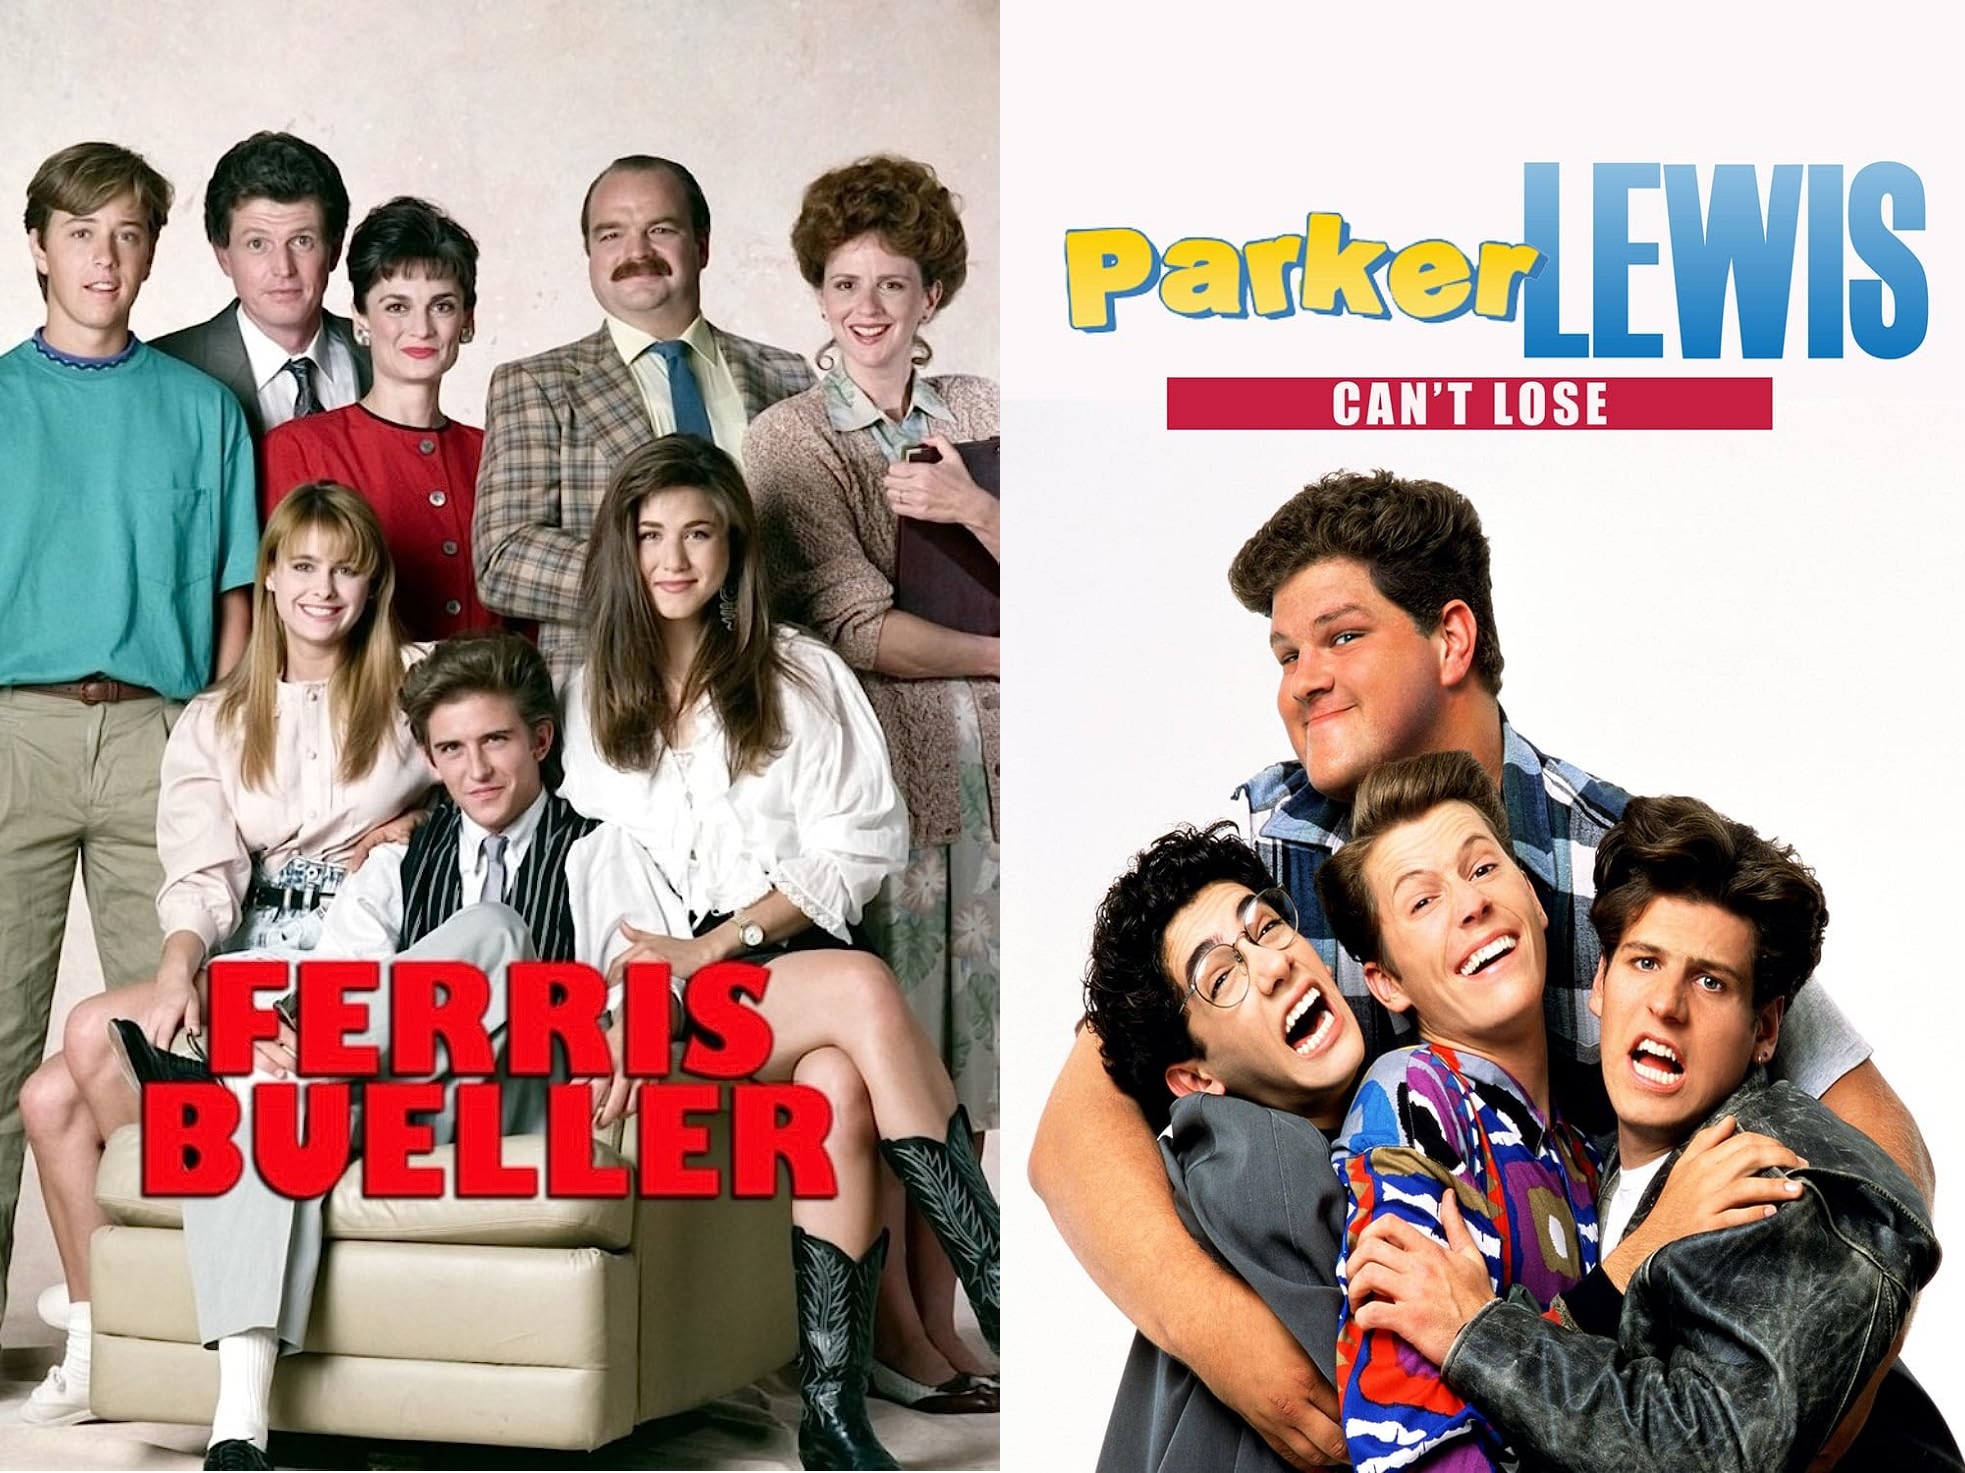 Two sitcoms based on Ferris Bueller's Day Off